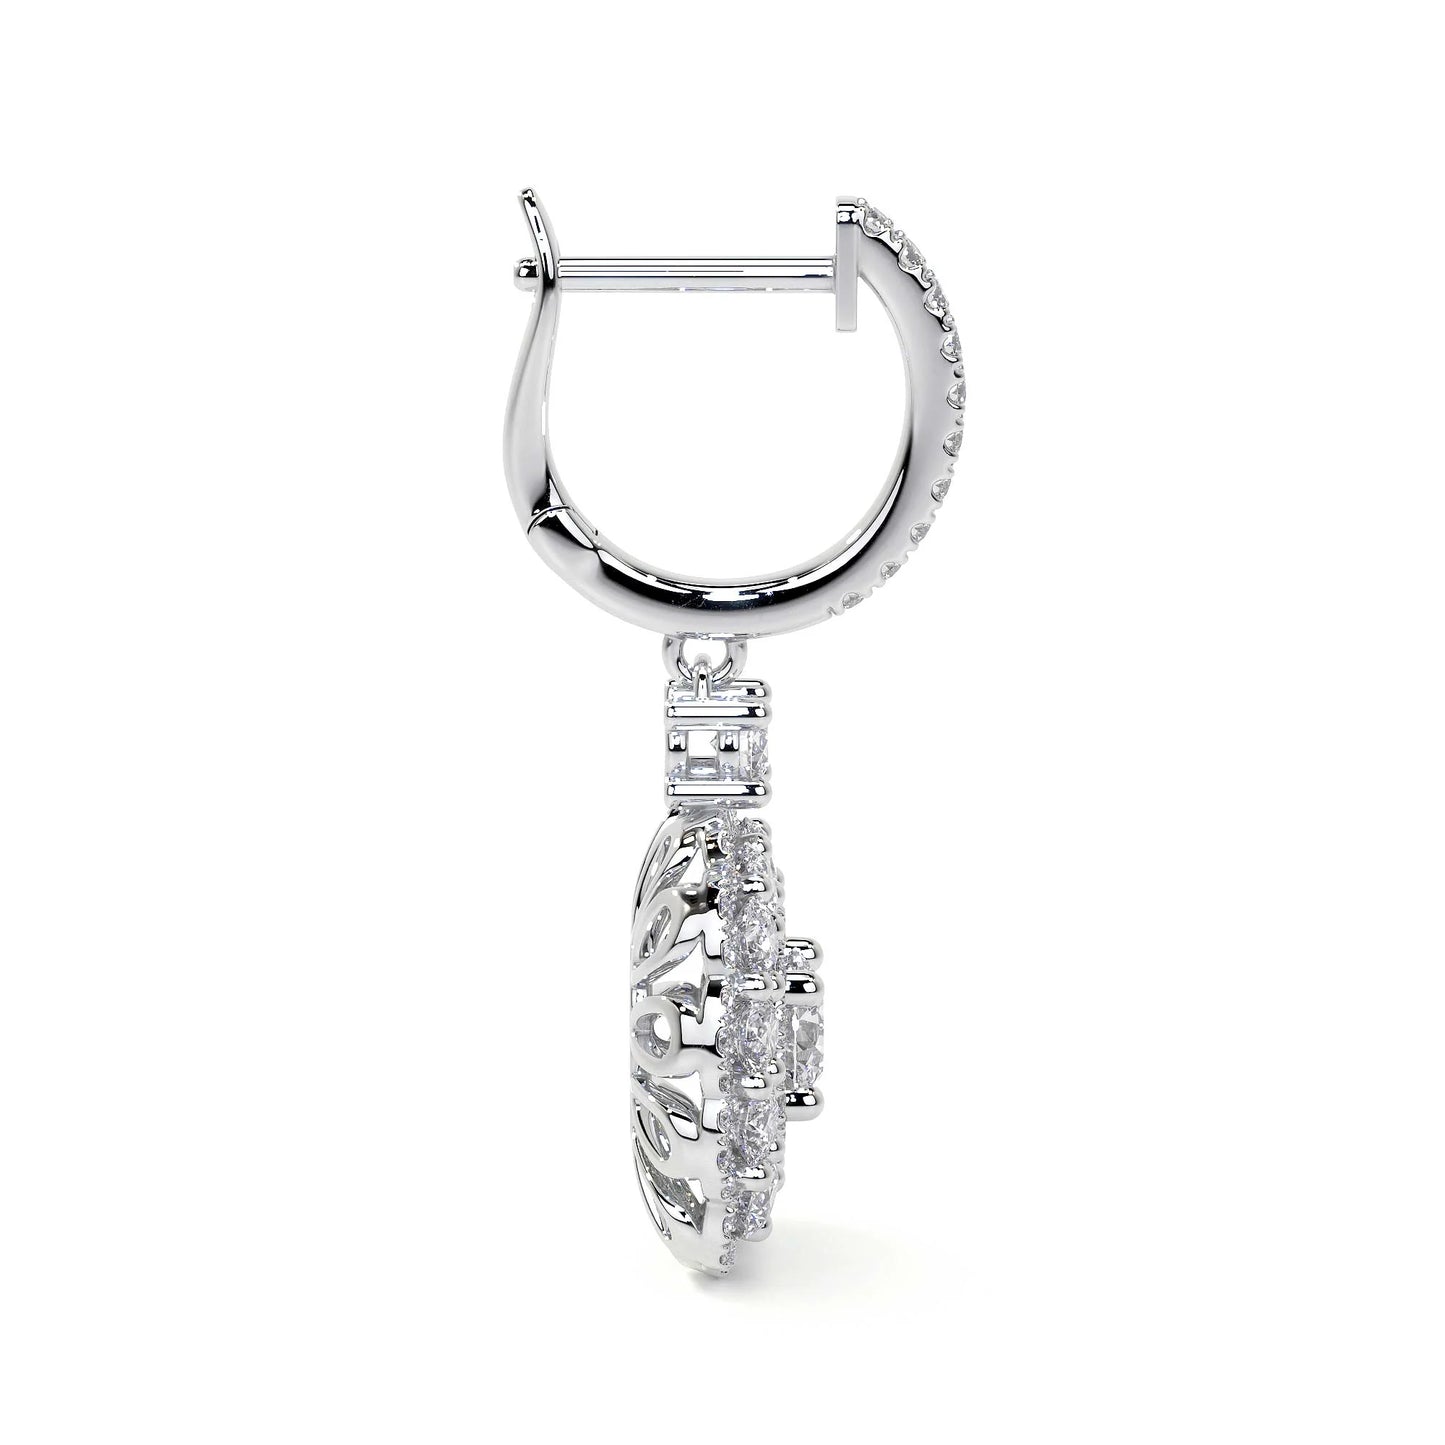 Drop Cluster Diamond Earrings with Halo